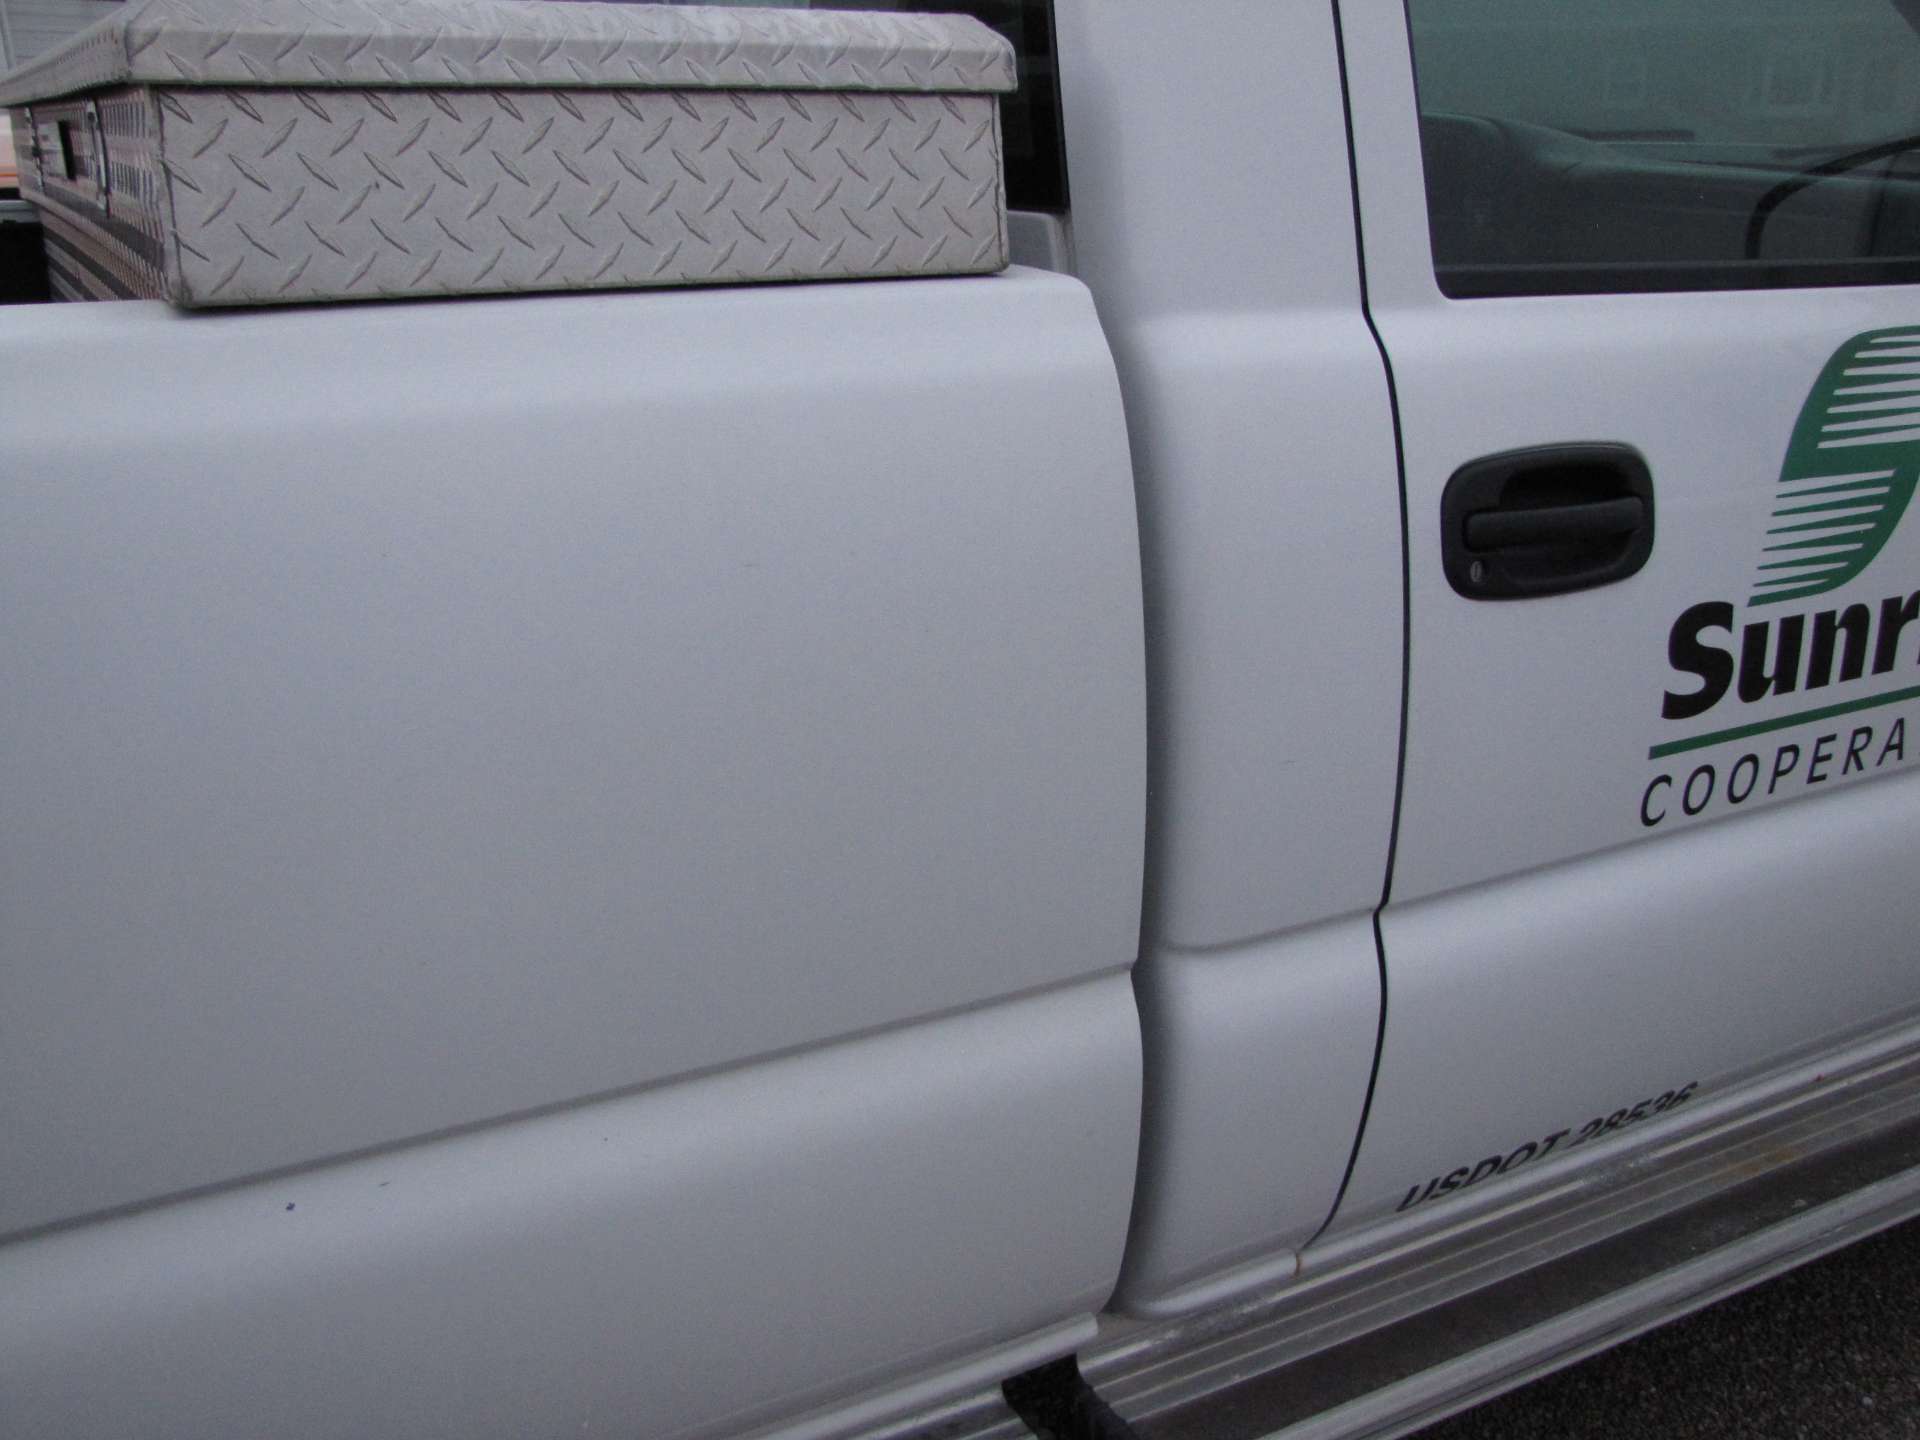 2006 Chevy 2500 HD pickup truck - Image 42 of 65